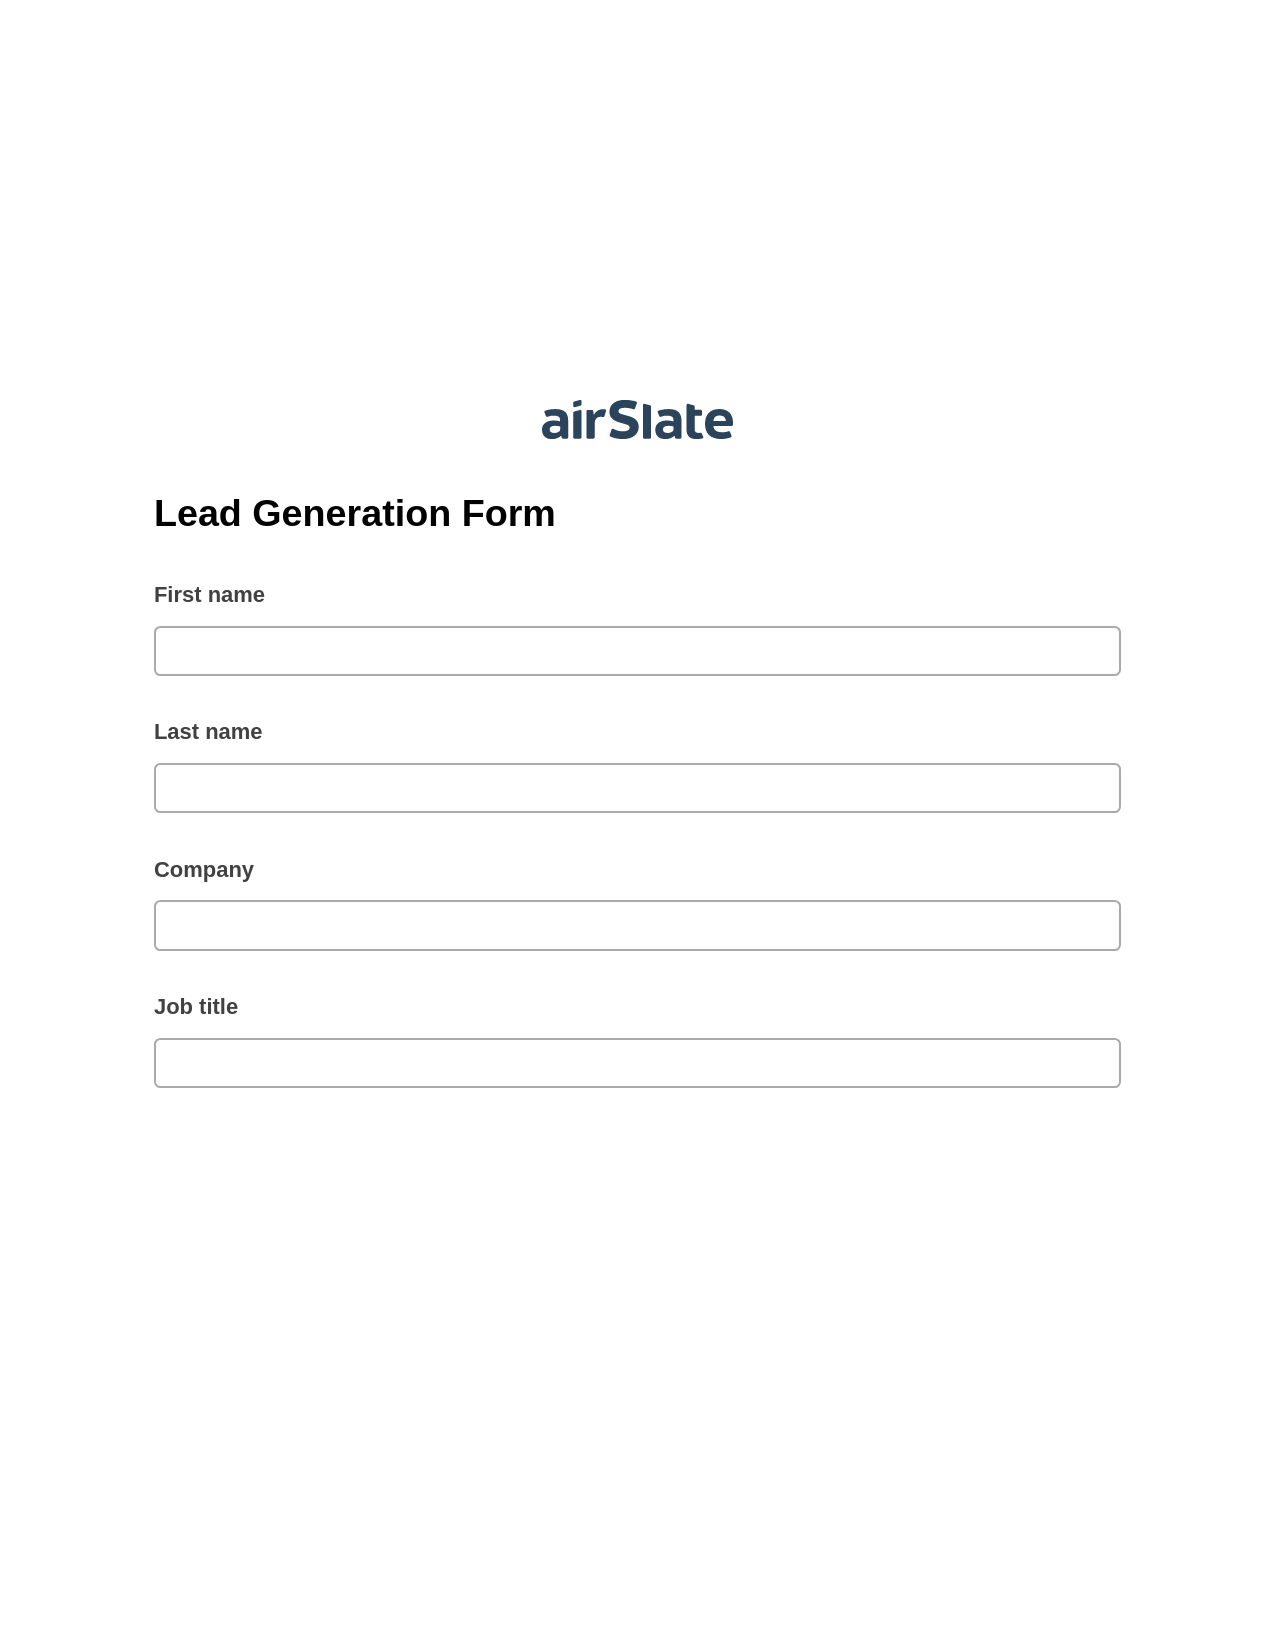 Lead Generation Form Pre-fill from CSV File Bot, Slack Notification Bot, Archive to Dropbox Bot